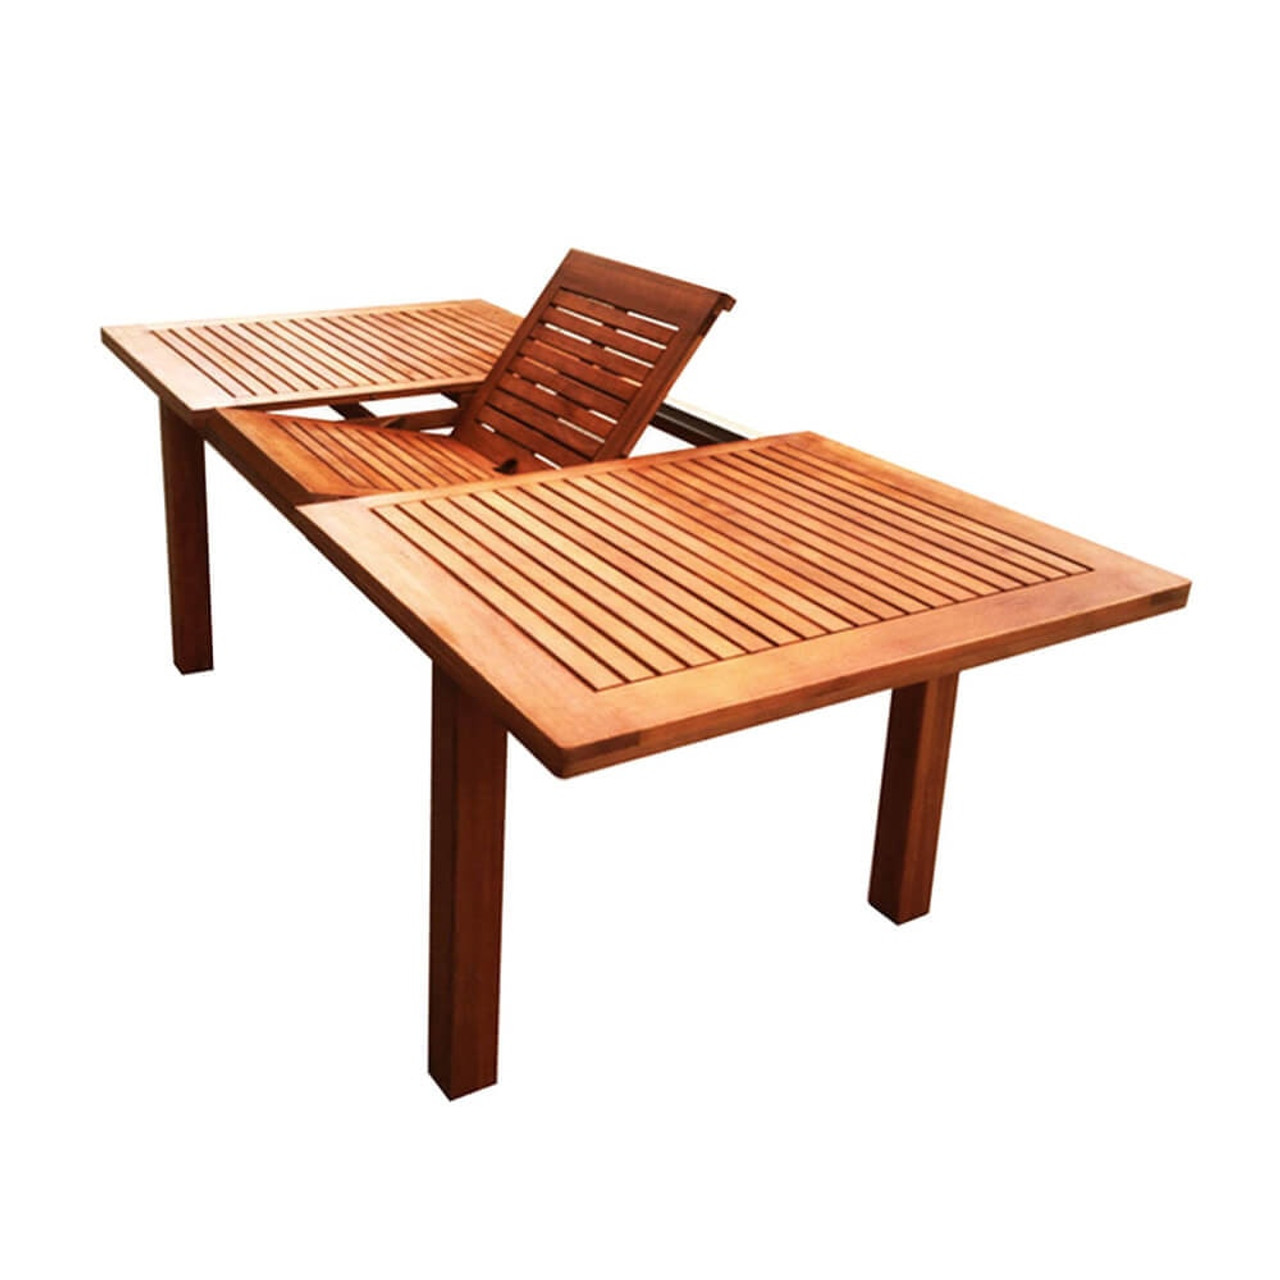 Luxo Montague Timber Extendable Outdoor Dining Table